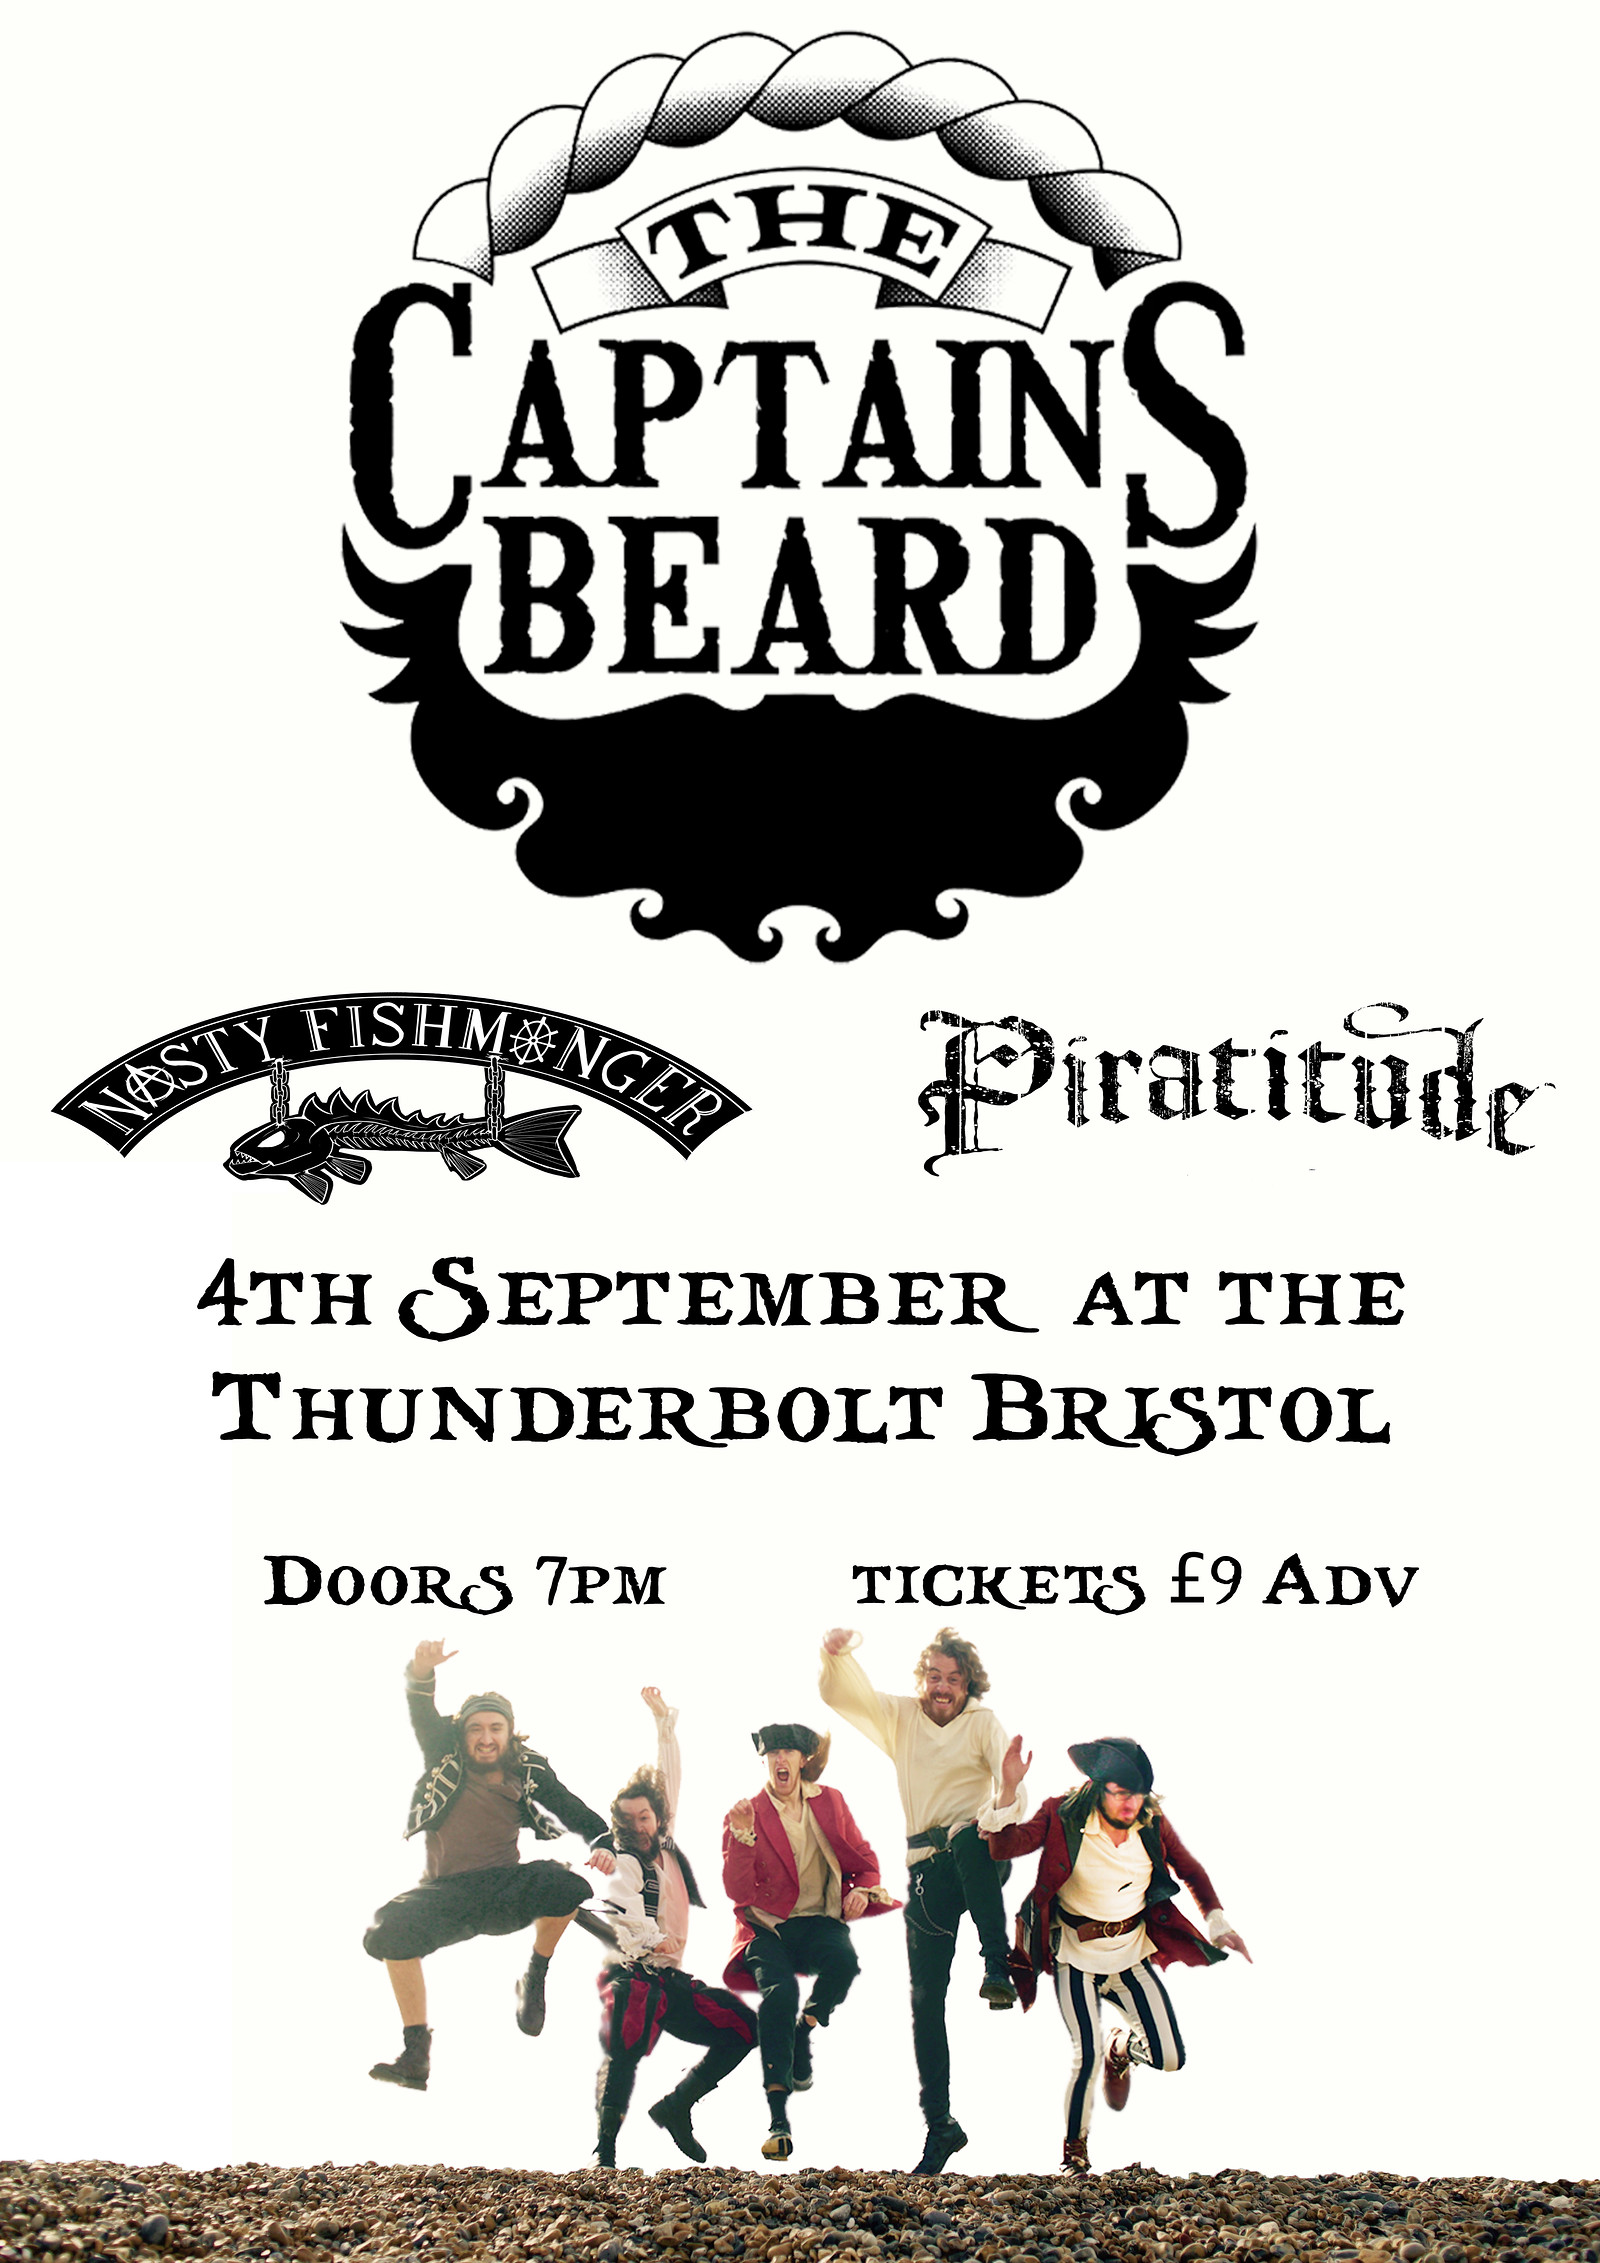 THE CAPTAINS BEARD + The Sweetchunks + Piratitude at The Thunderbolt